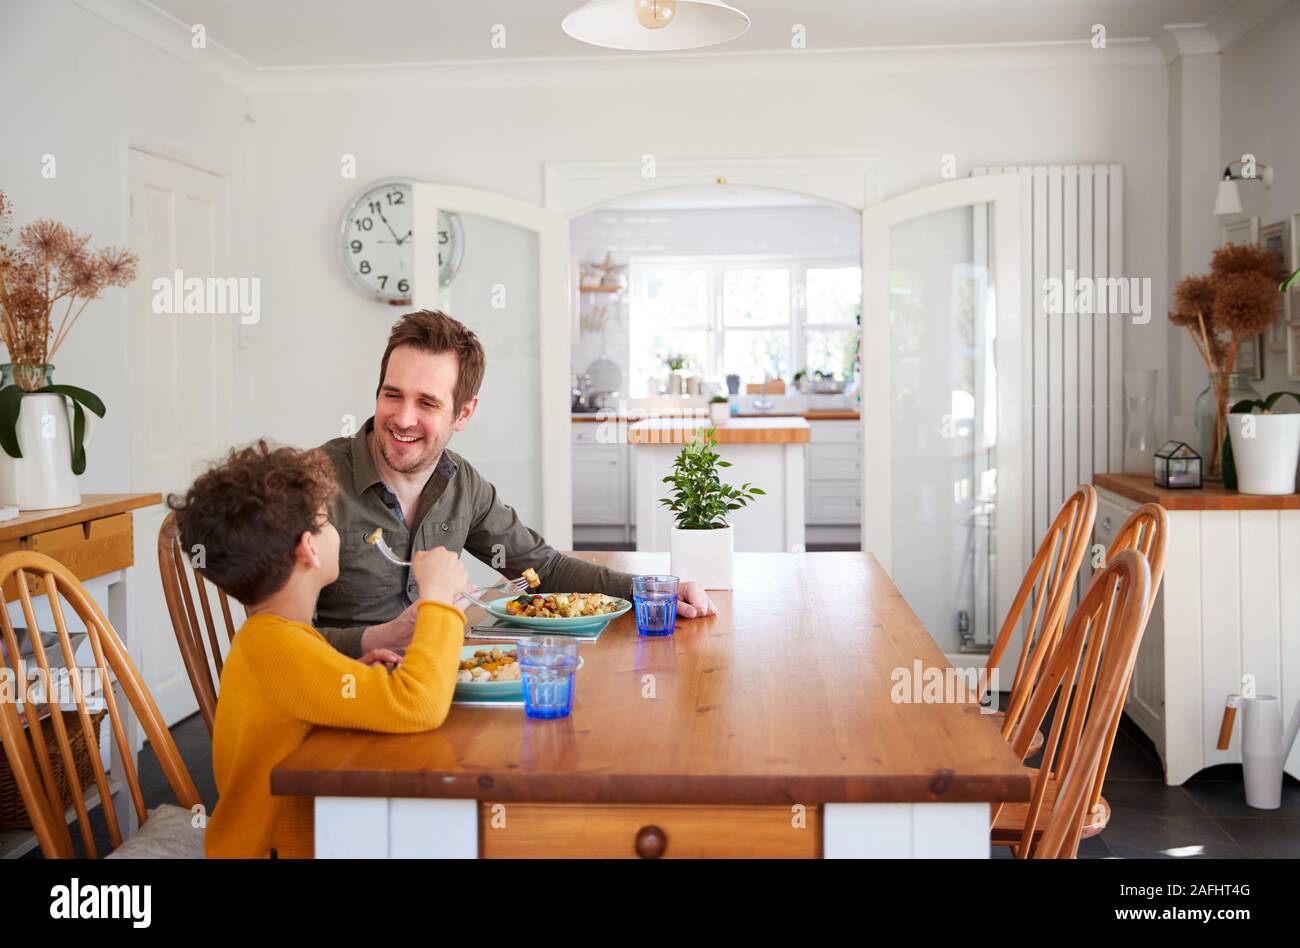 Single Father Sitting At Table Eating Meal With Son In Kitchen At Home Stock Photo